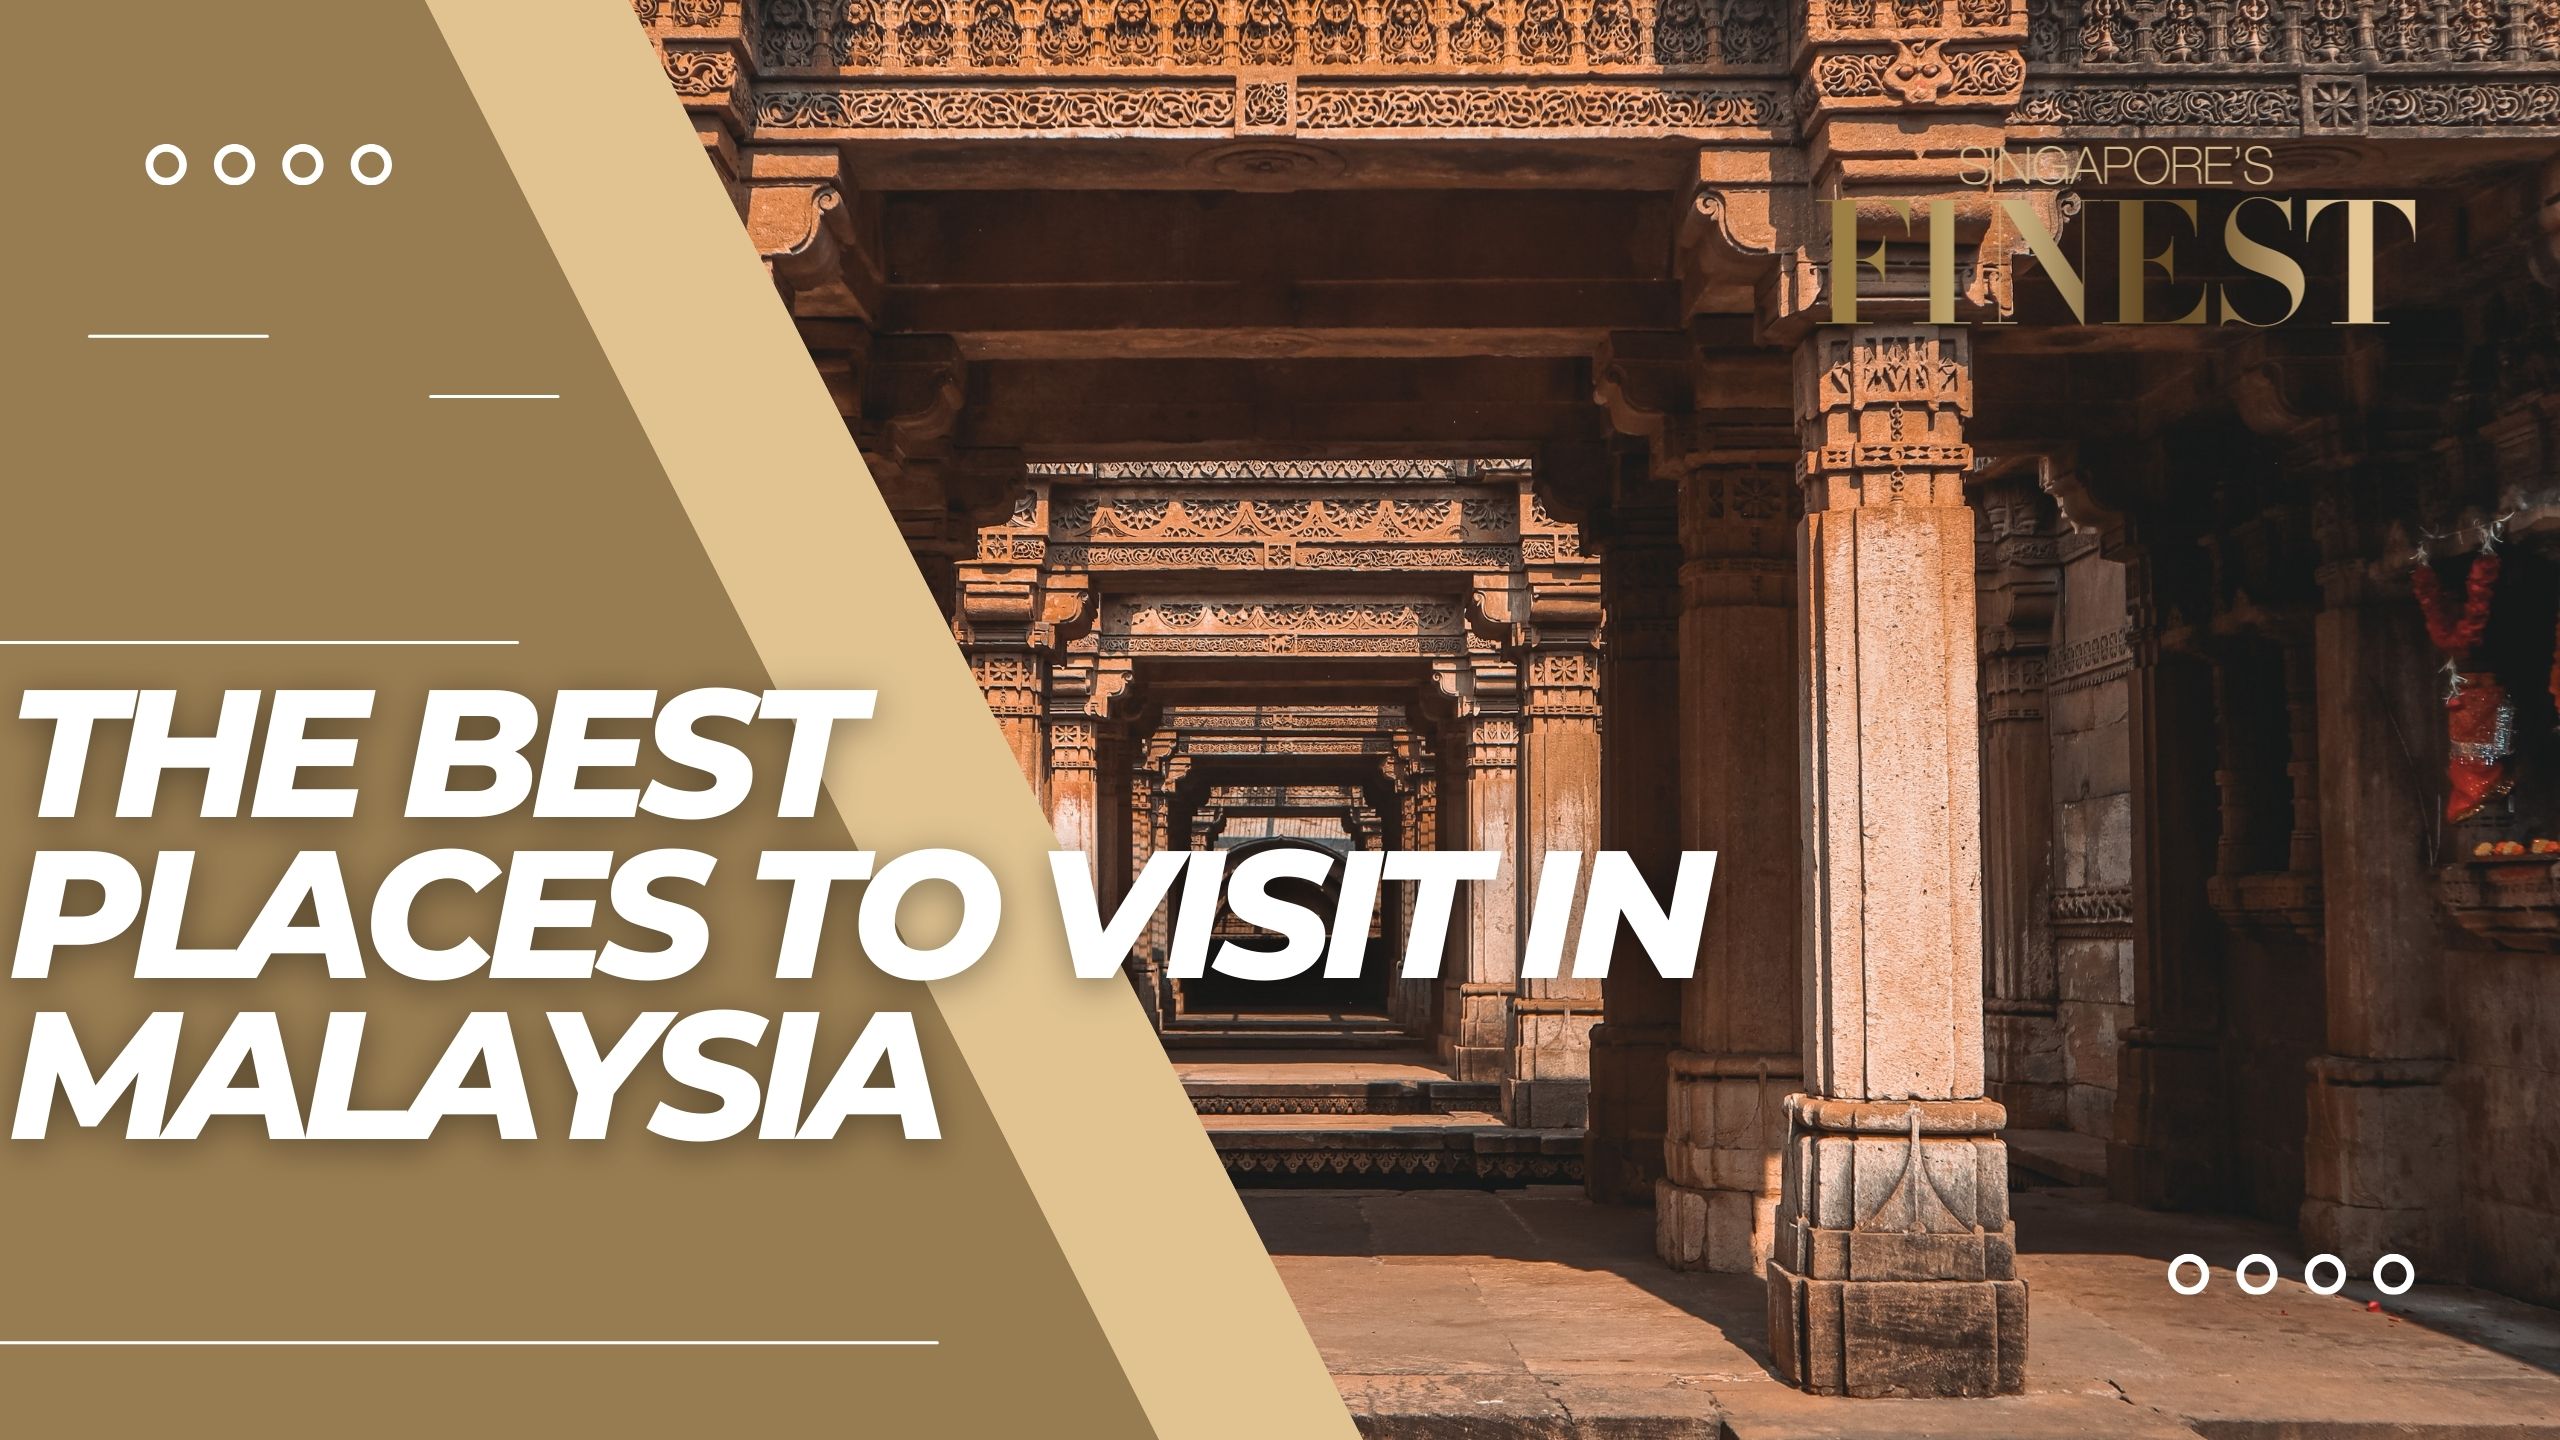 The Finest Places to Visit in Malaysia